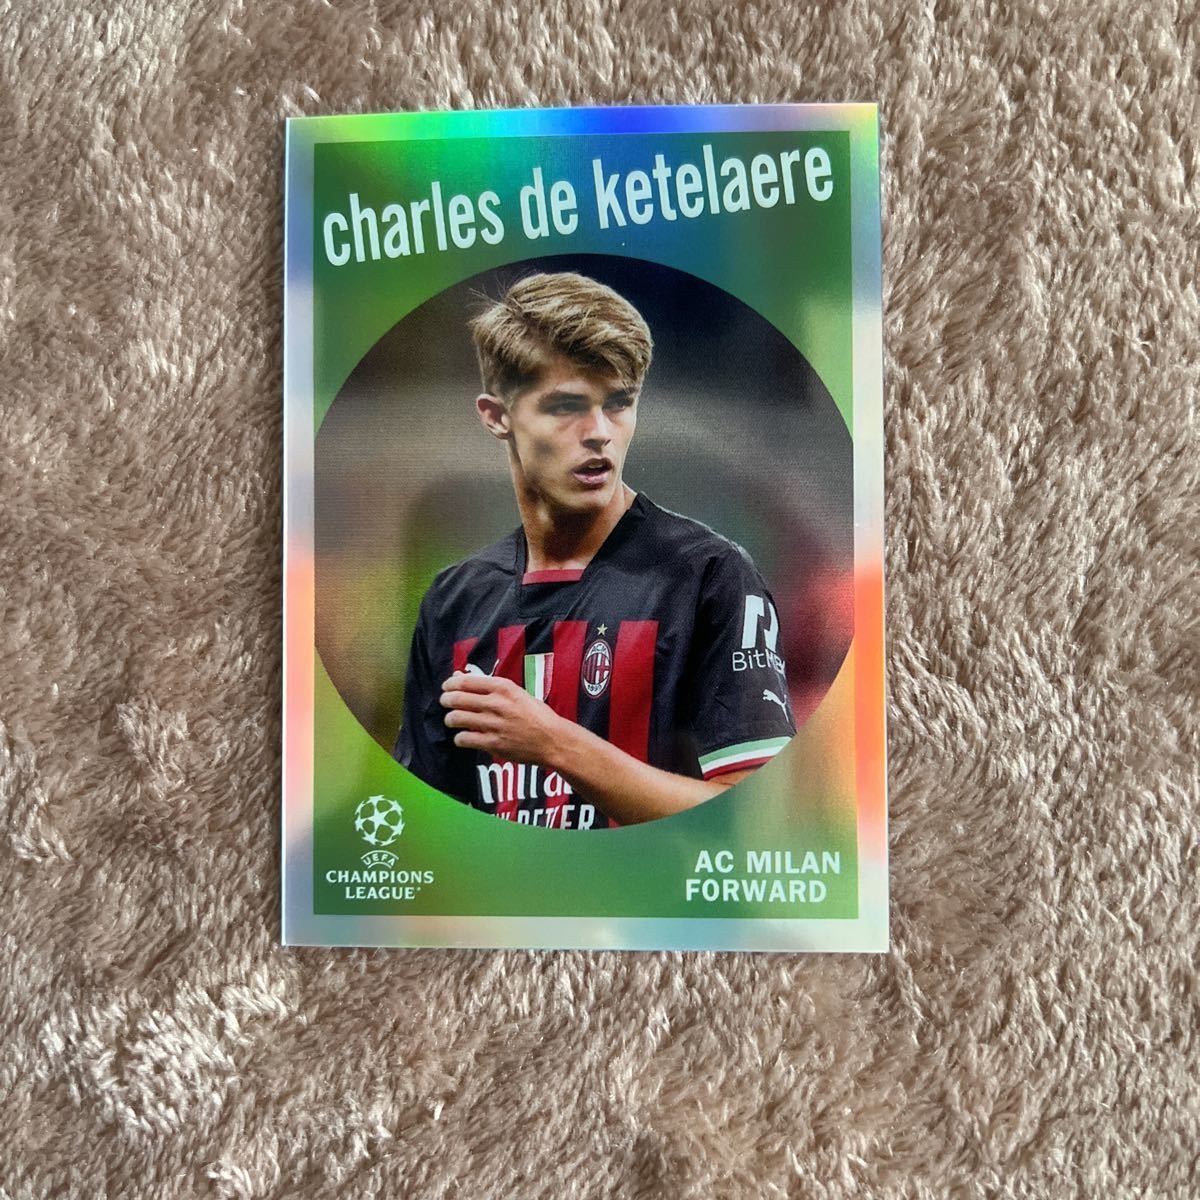 Topps Chrome Uefa club competitions UCC 2022/2023 - Charles De Ketelaere CDK- 1959 Topps refractor インサイドカード AC Milan_画像1